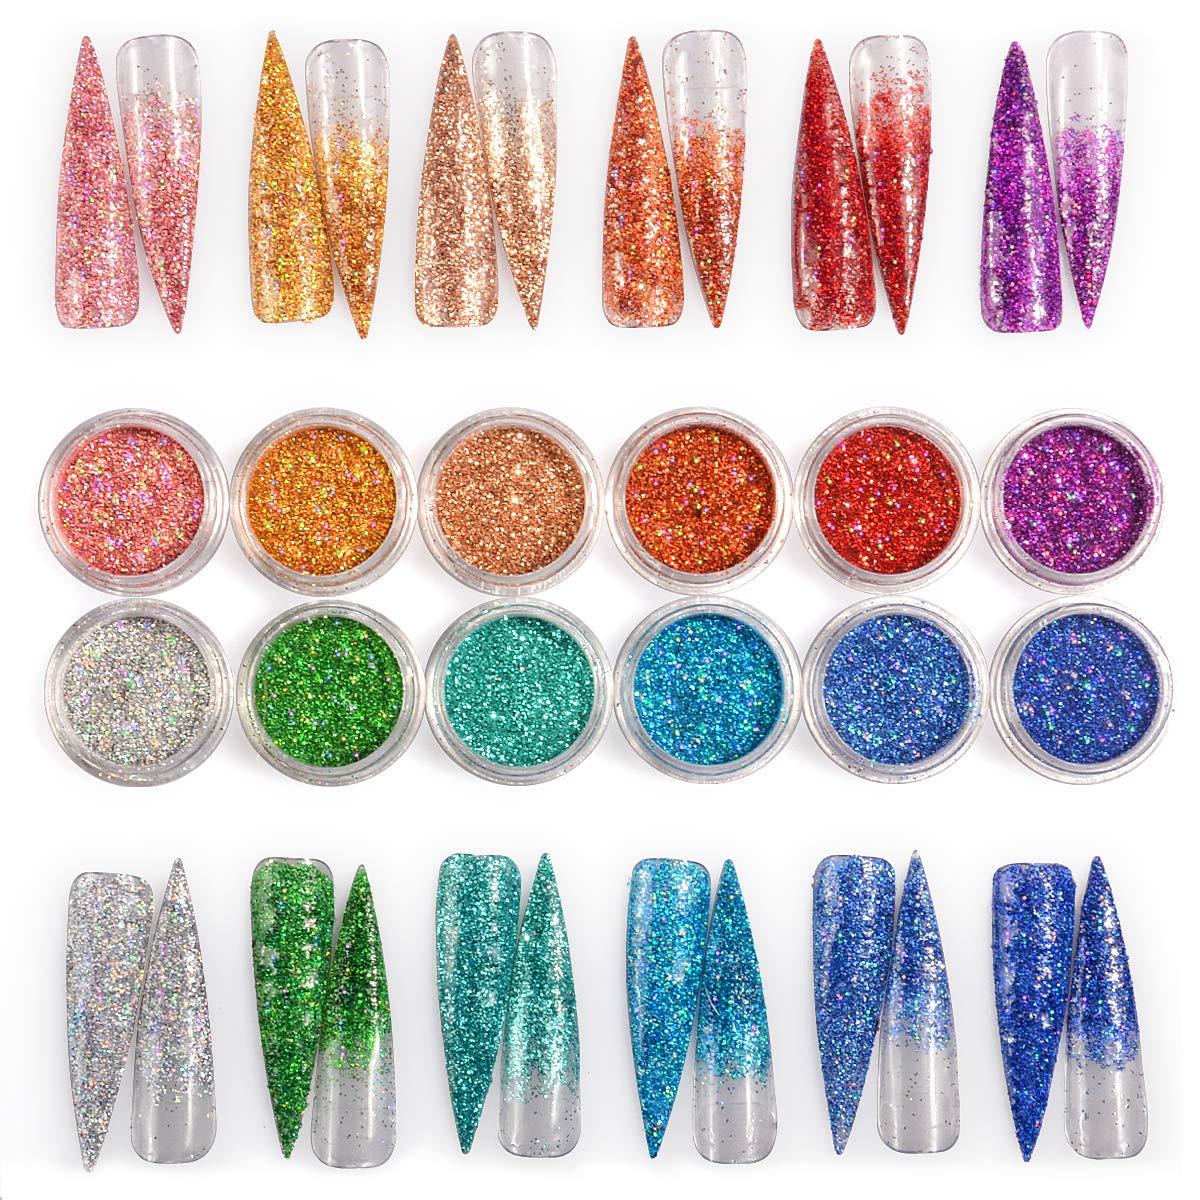 Warmfits Holographic Nail Glitter 12 Colors Holo Laser Superfine